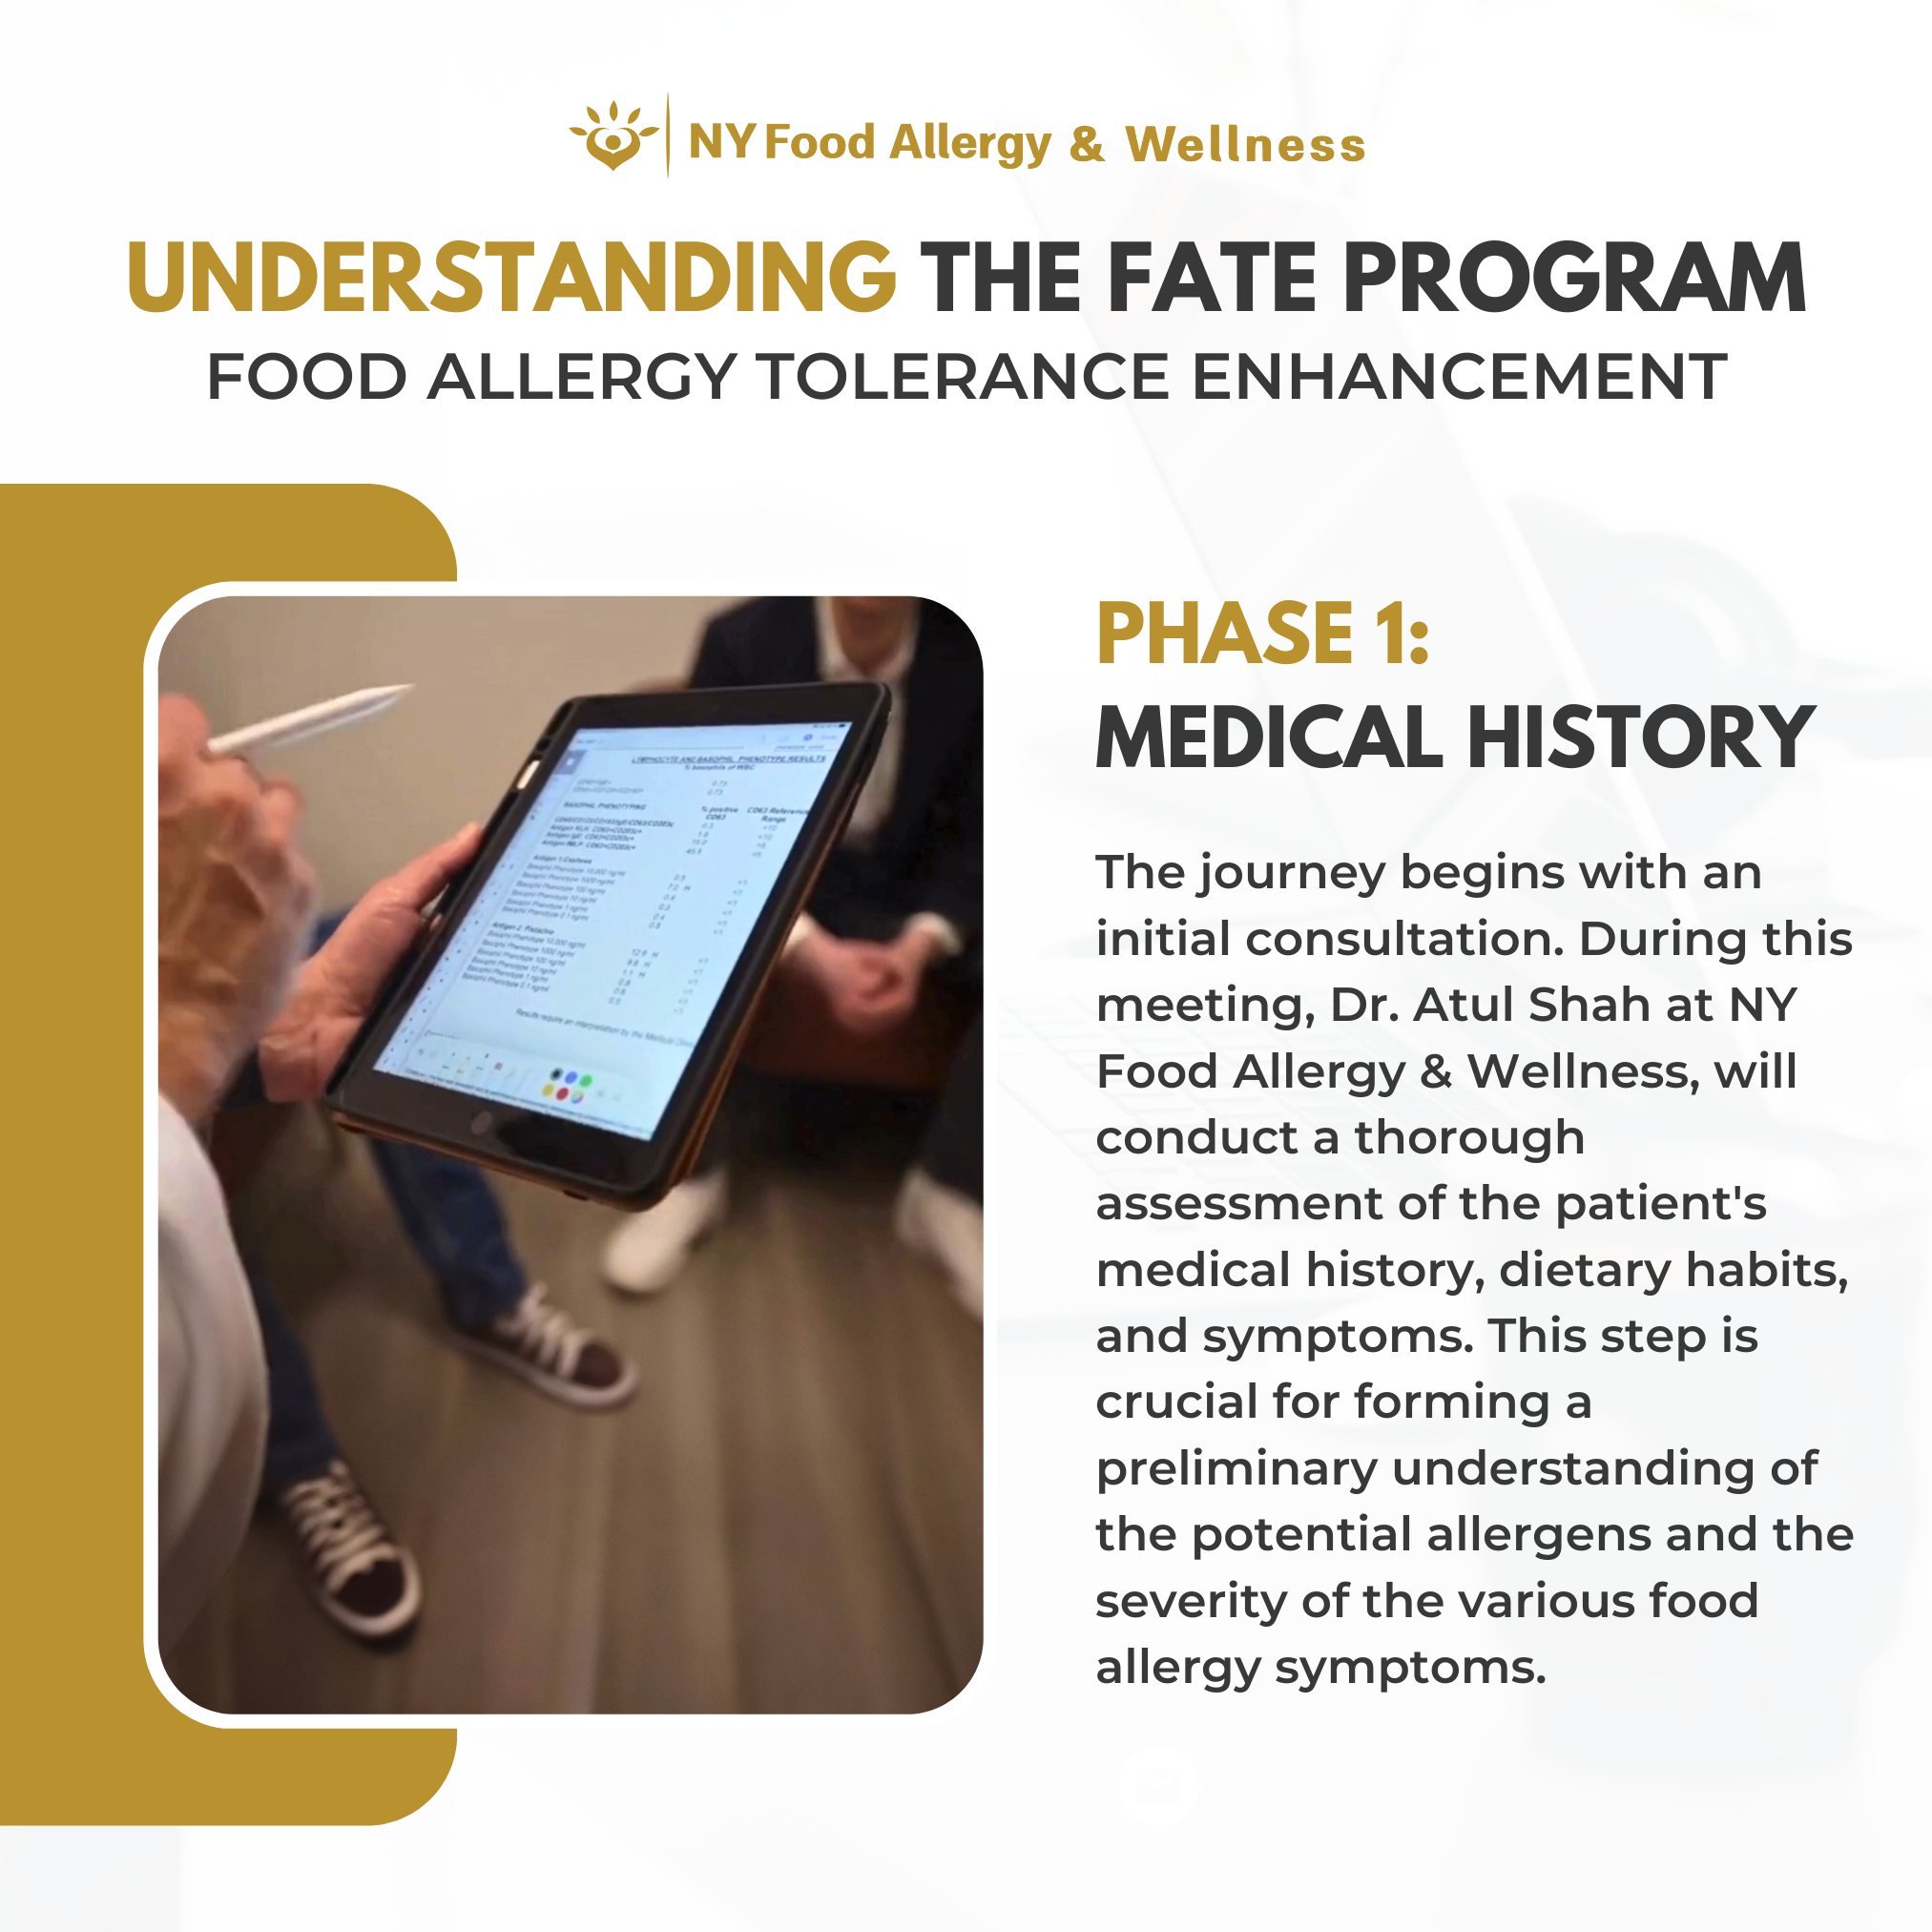 🌟 Embark on a journey to #FoodAllergyFreedom with NY Food Allergy &amp; Wellness! 

👨&zwj;⚕️ Step 1 of our FATE program involves a crucial initial consultation with Dr. Atul Shah. Here, we delve deep into your medical history to tailor a path towar